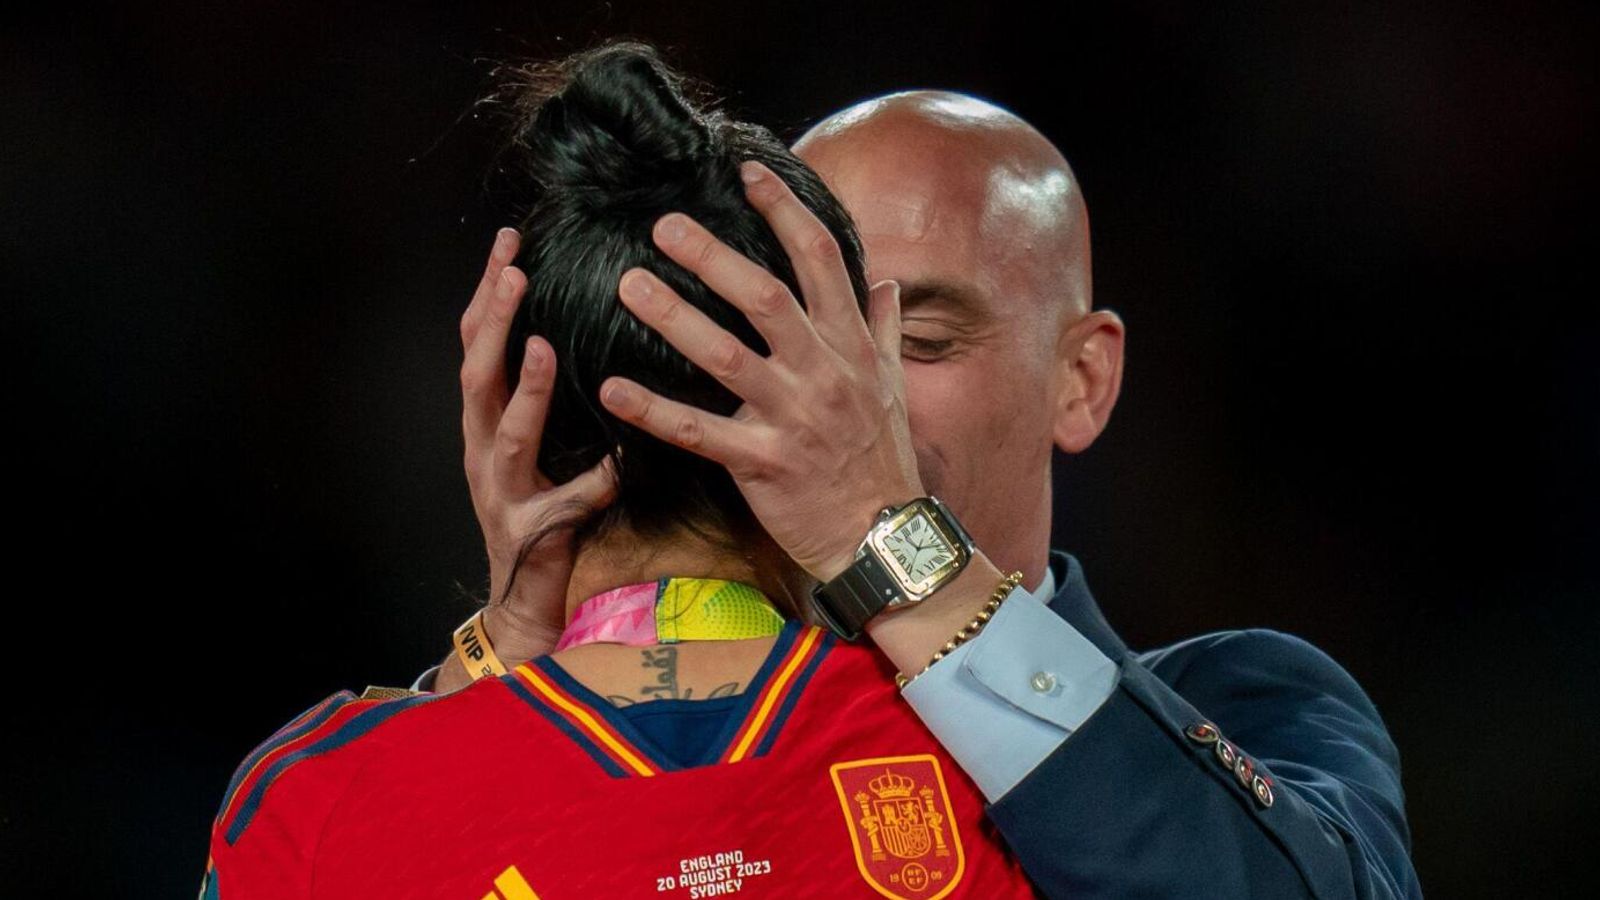 Women’s World Cup: Jenni Hermoso left out of Spain squad ‘to protect her’ after kiss scandal